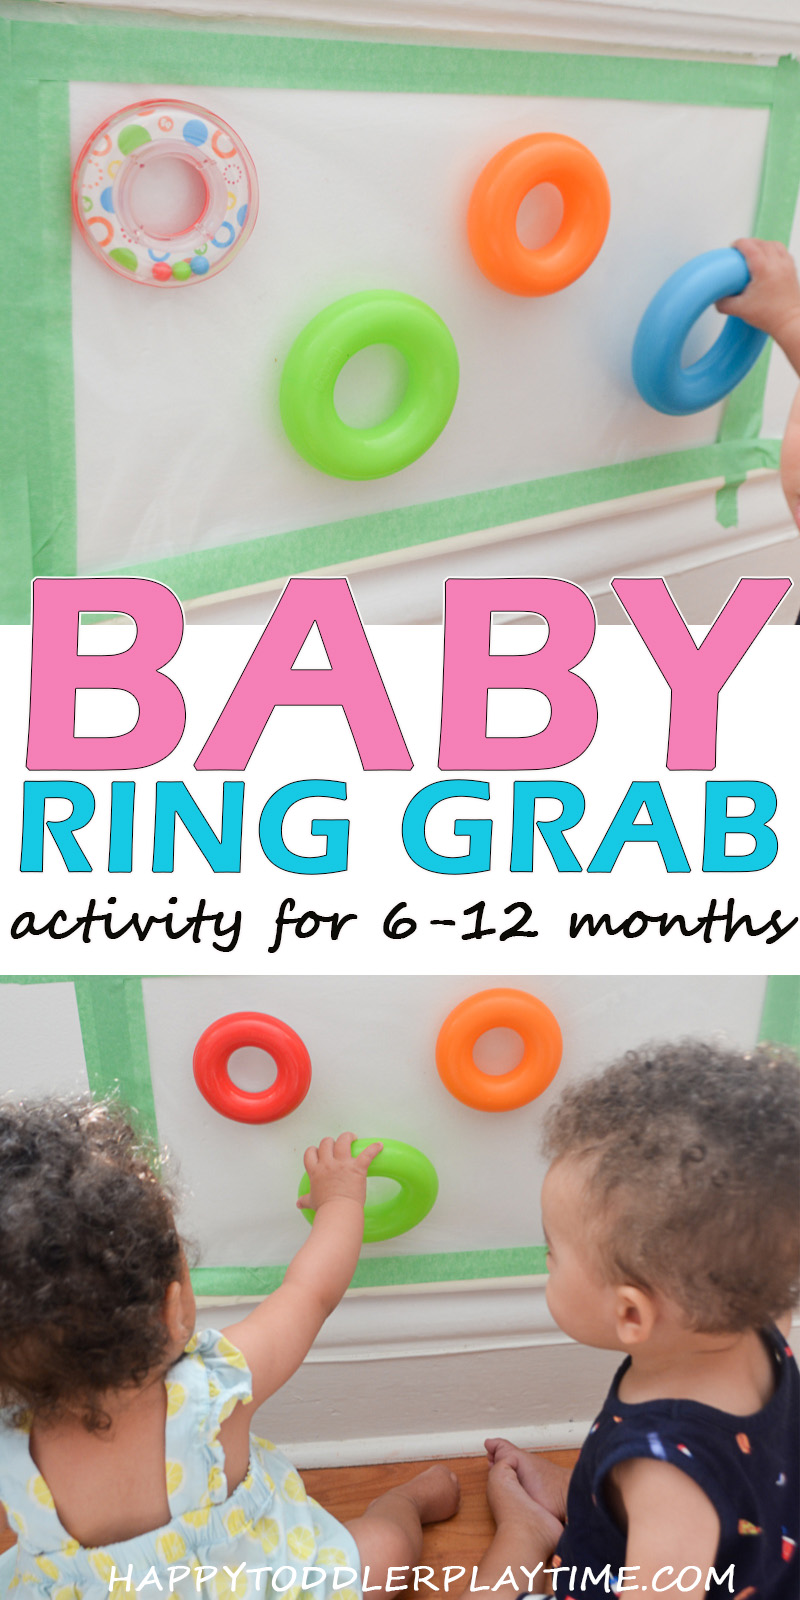 BABY Ring Grab sticky wall activity for babies